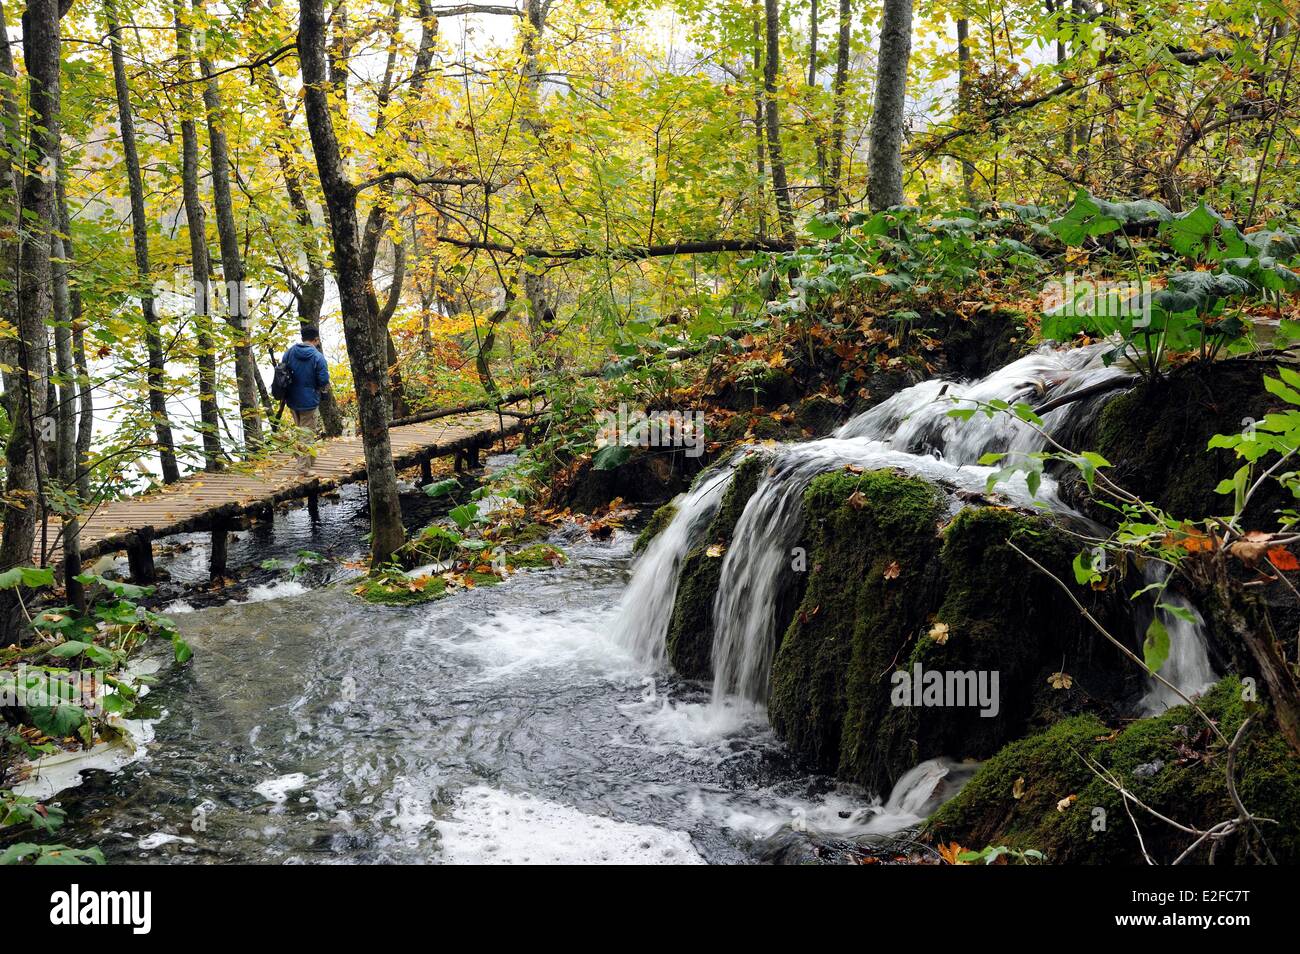 Croatia, Plitvice Lakes National Park listed as World Heritage by UNESCO, upper lakes Stock Photo